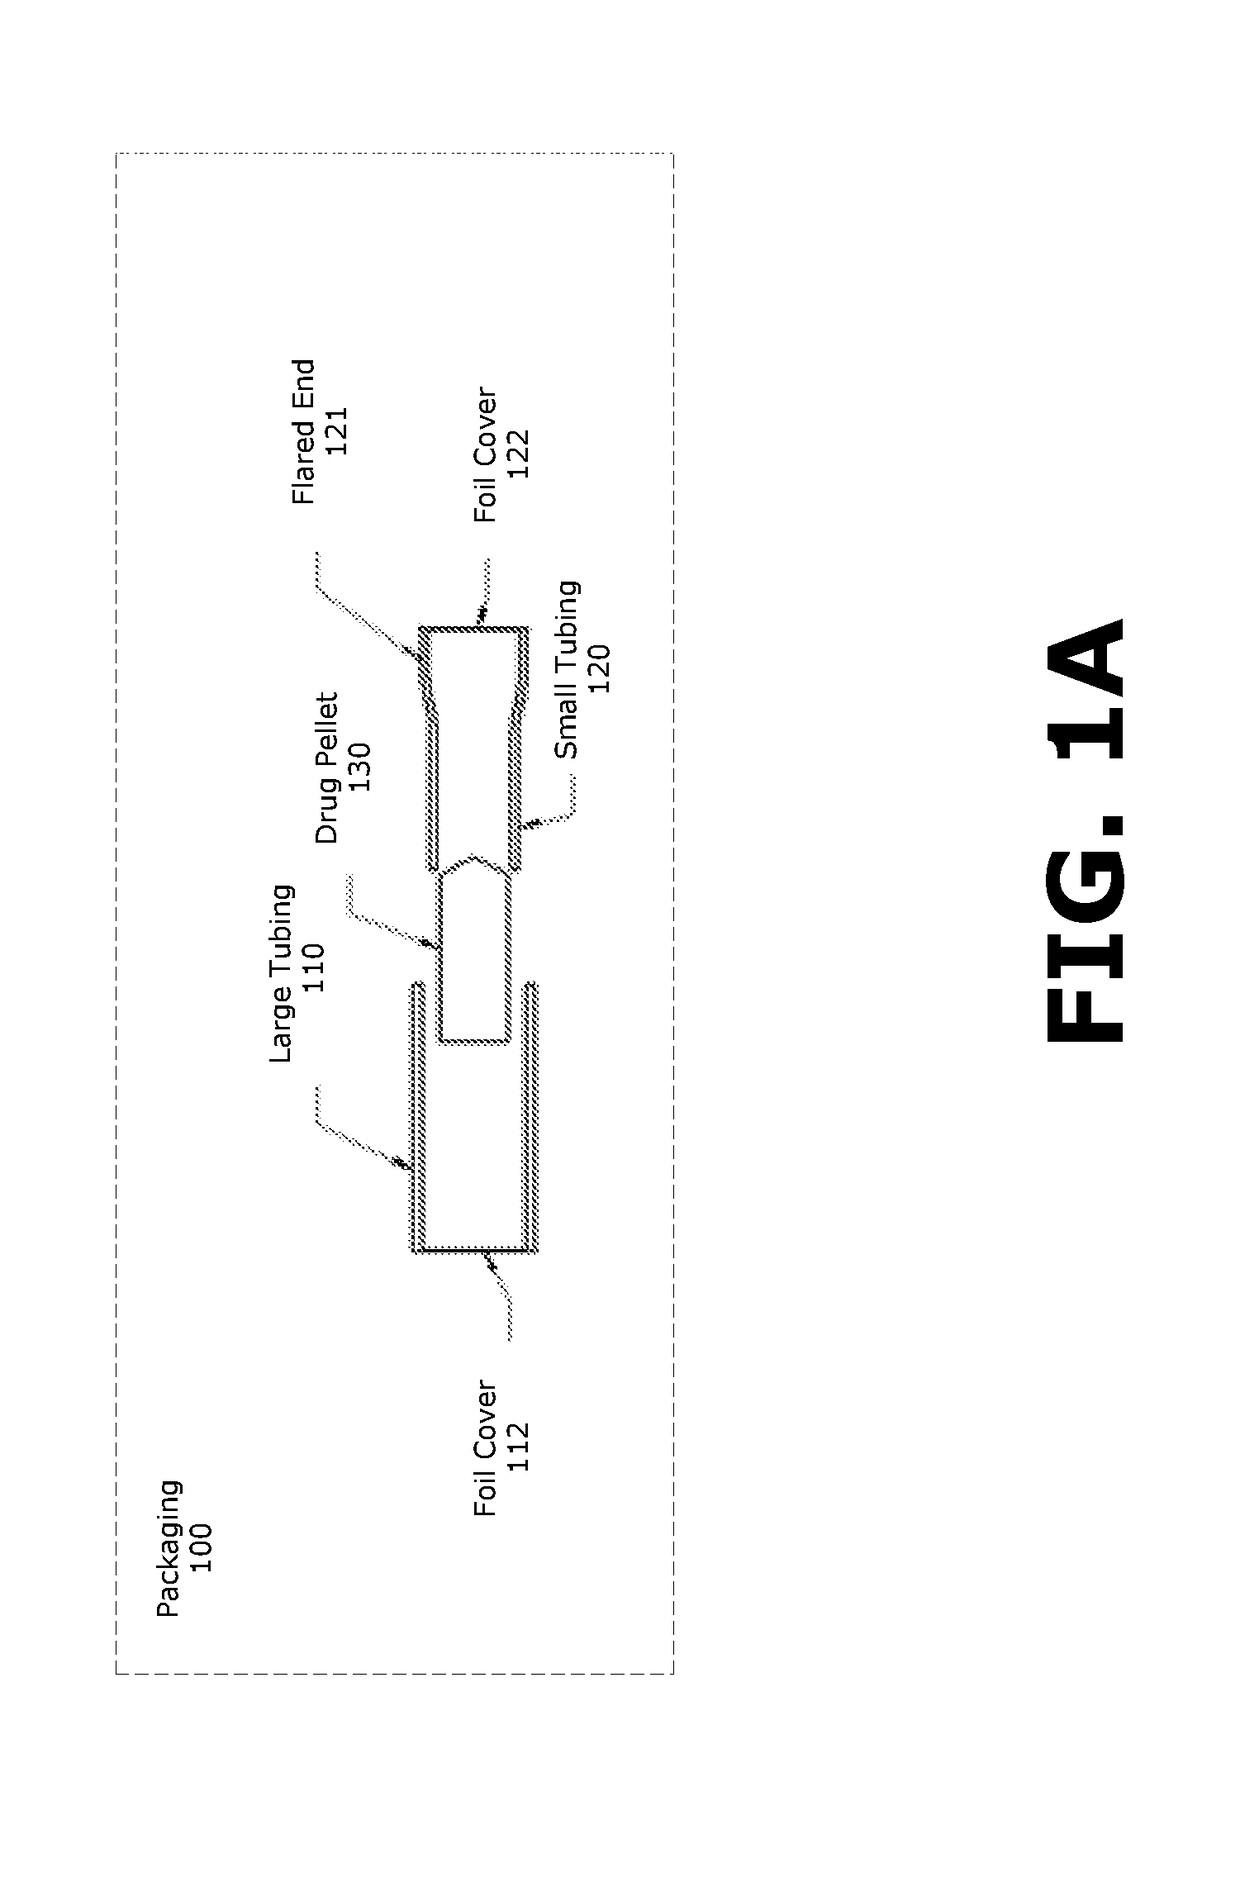 Solid drug storage apparatus, formulations and methods of use